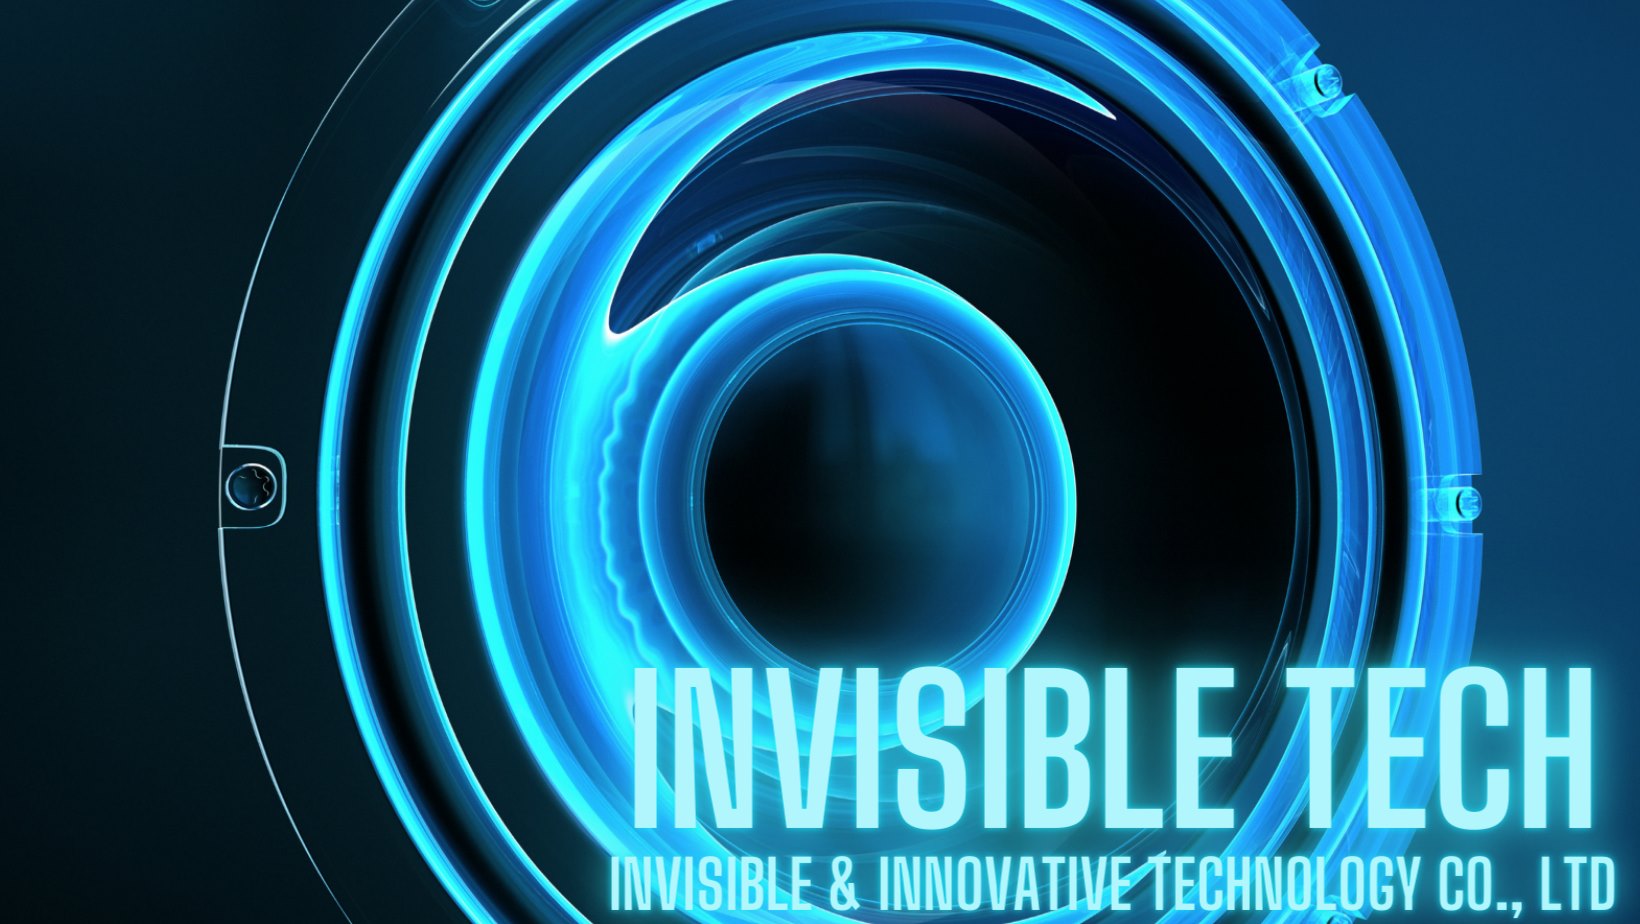 Invisible_Tech 橫幅